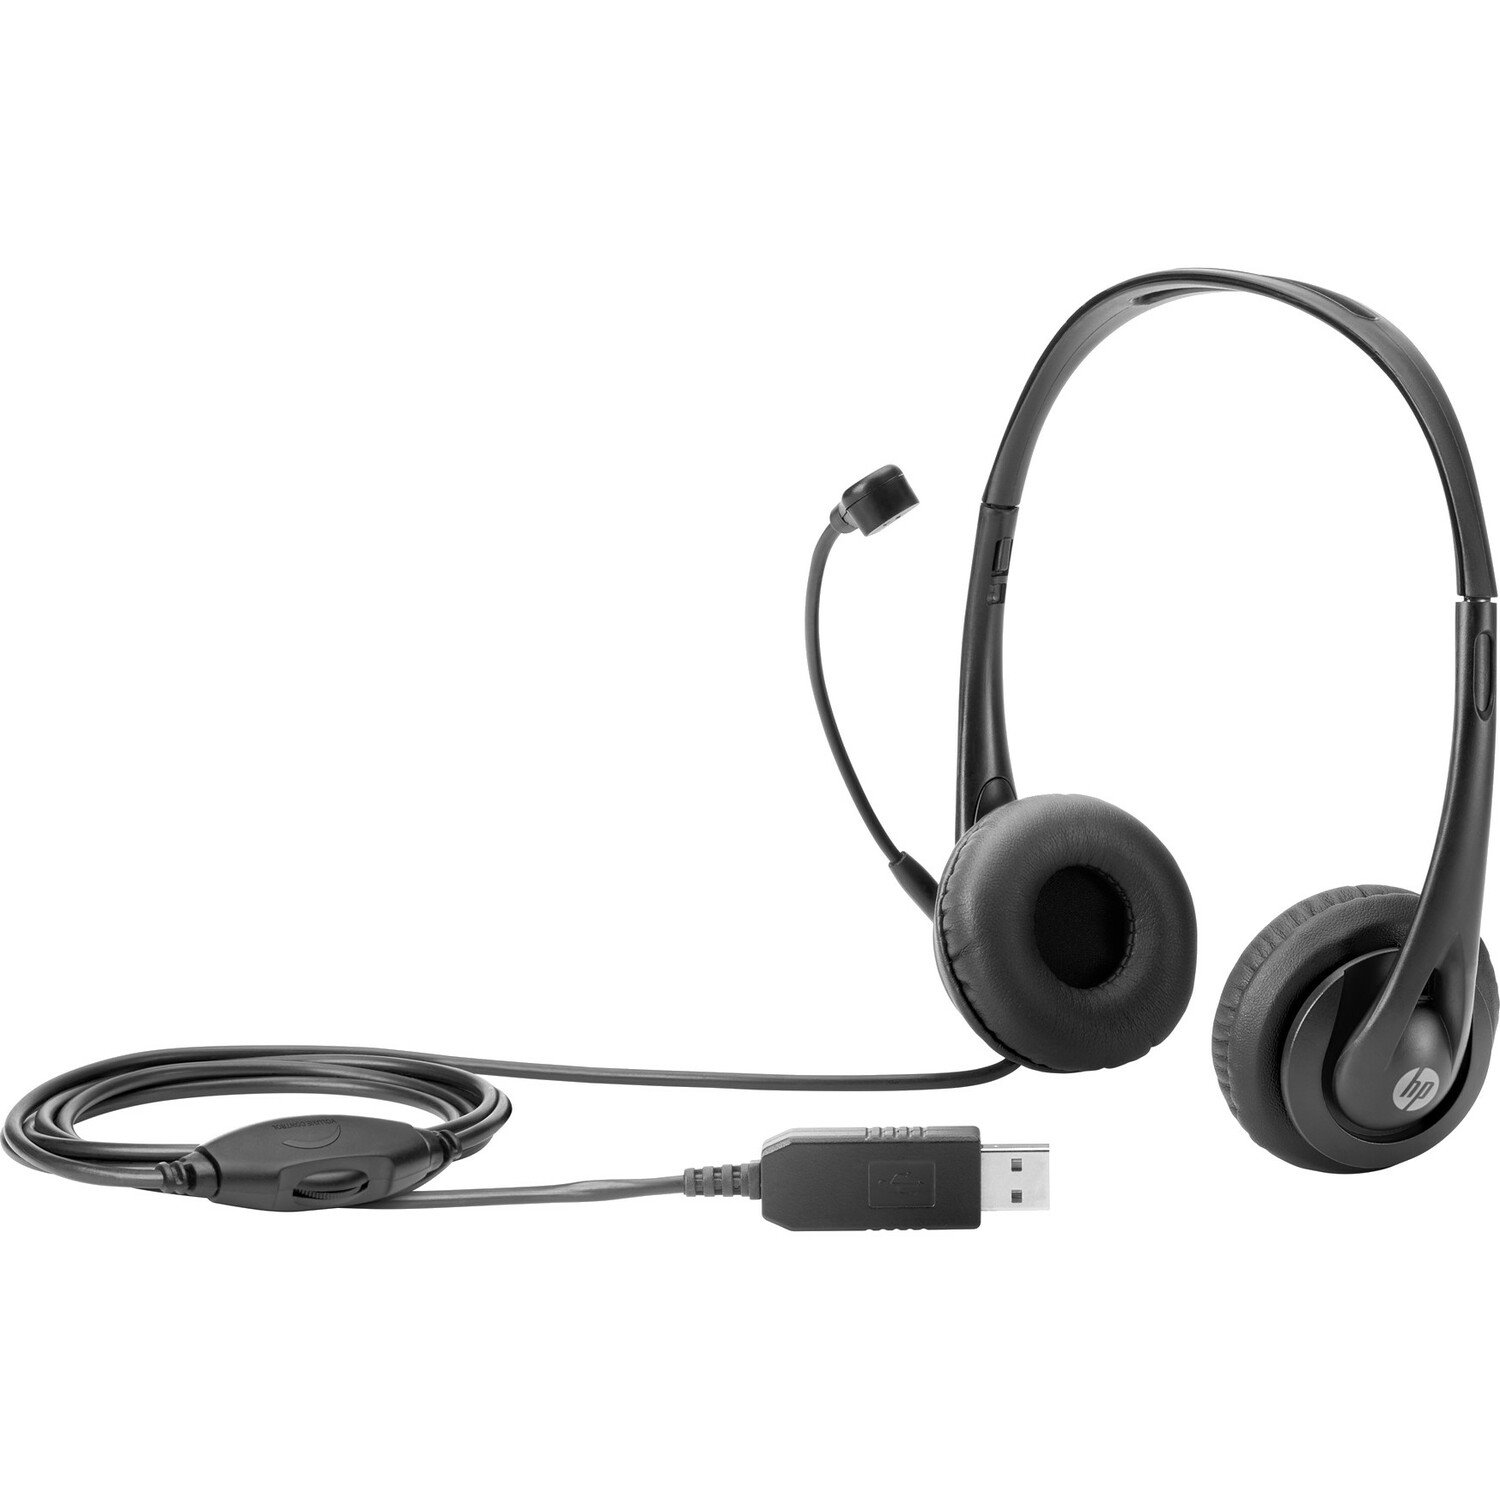 HP Wired Over-the-head Stereo Headset